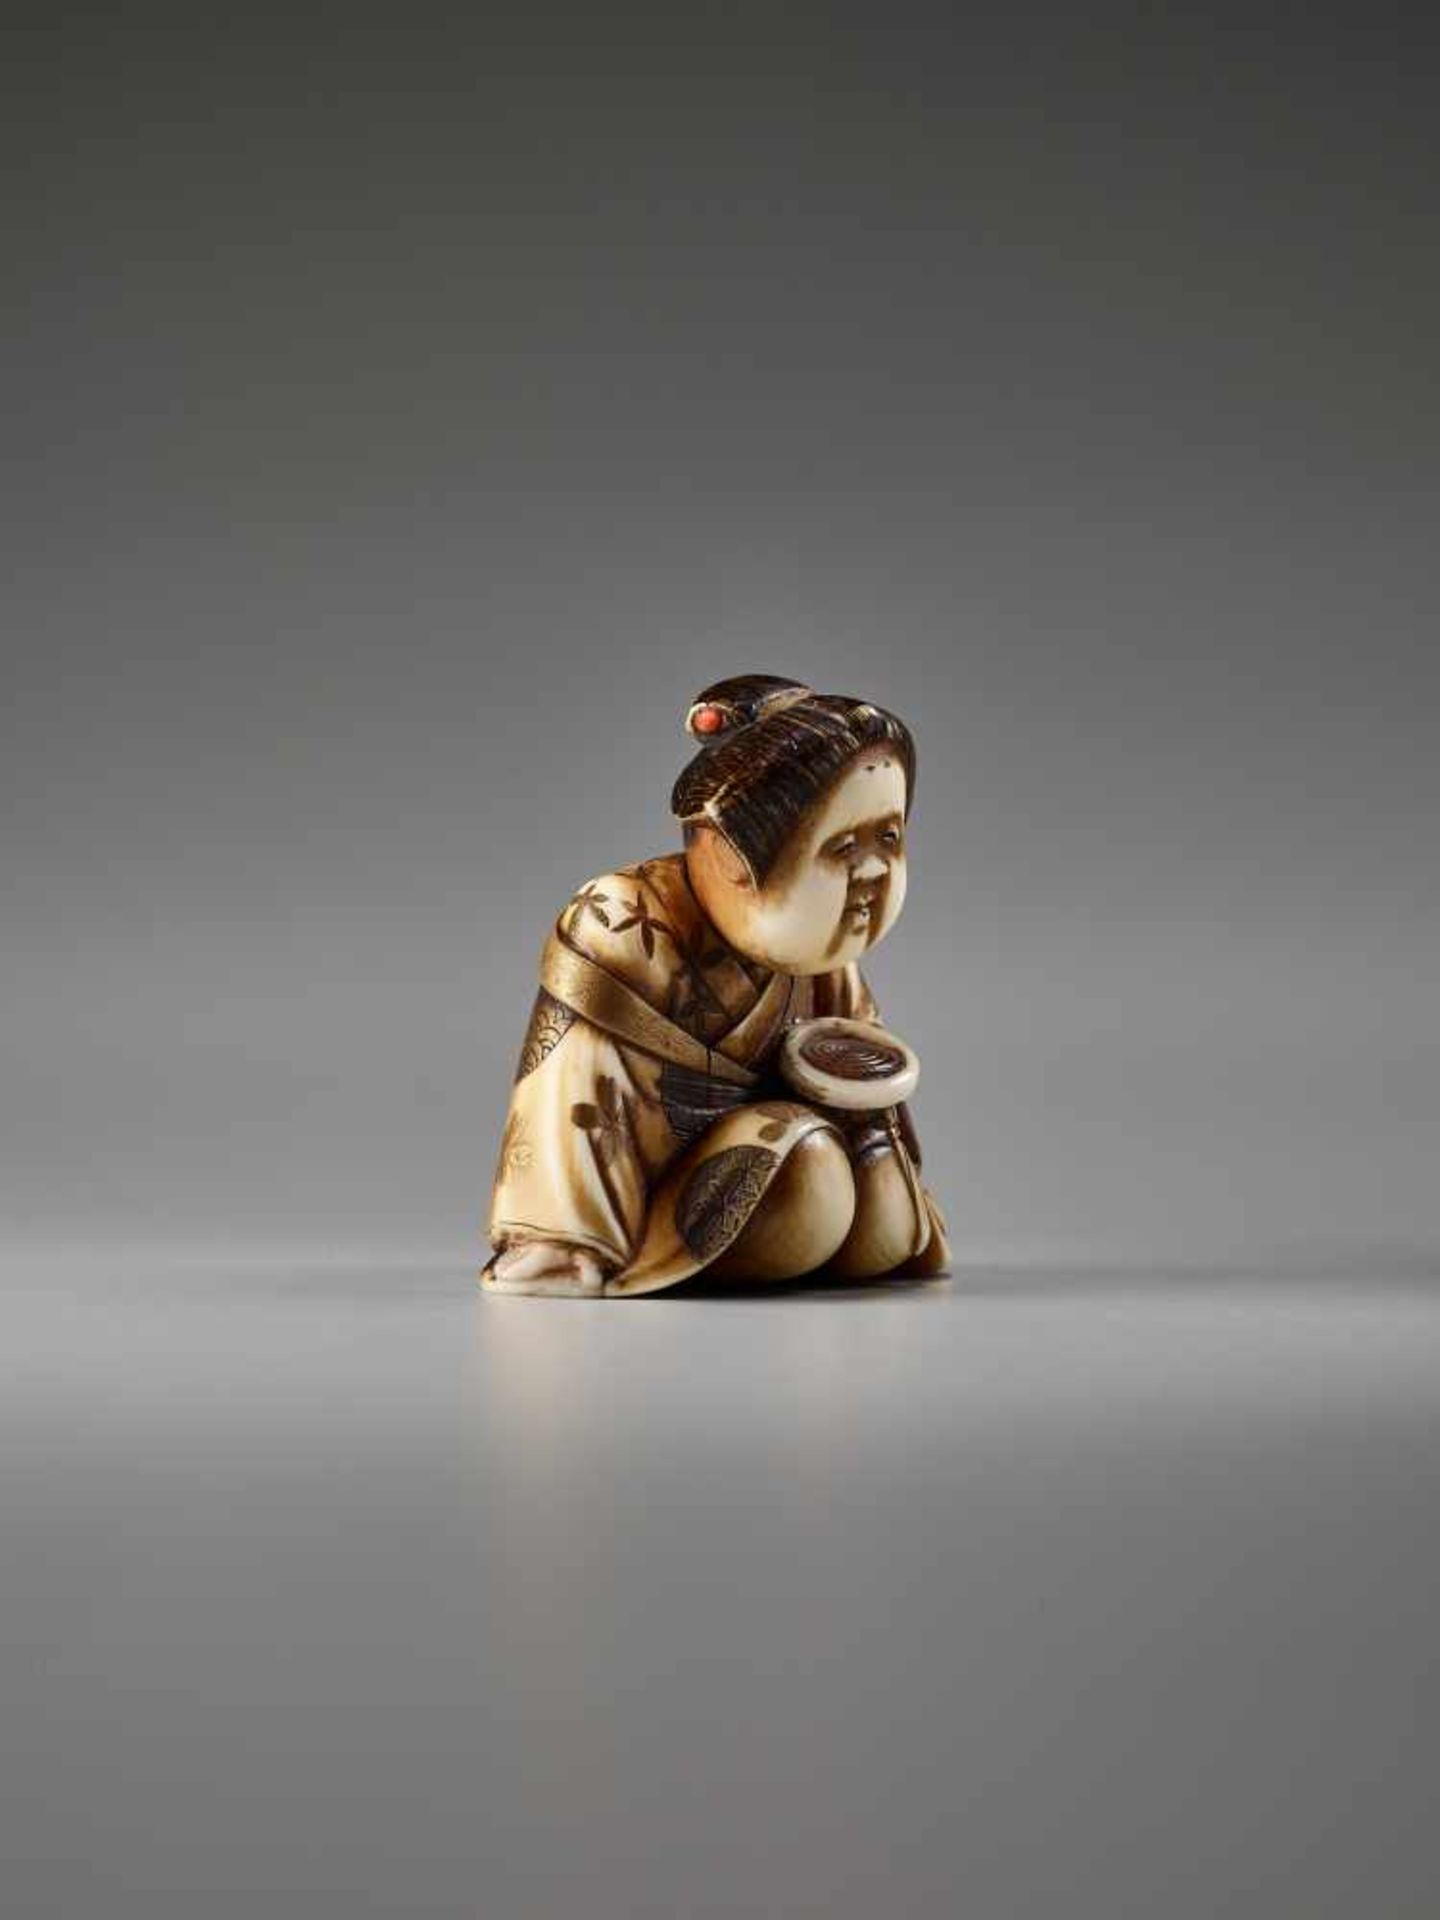 AN IVORY AND LACQUER NETSUKE OF OKAME WITH A SAKE CUP BY KEIMIN By Keimin, ivory netsuke with gold - Image 5 of 7